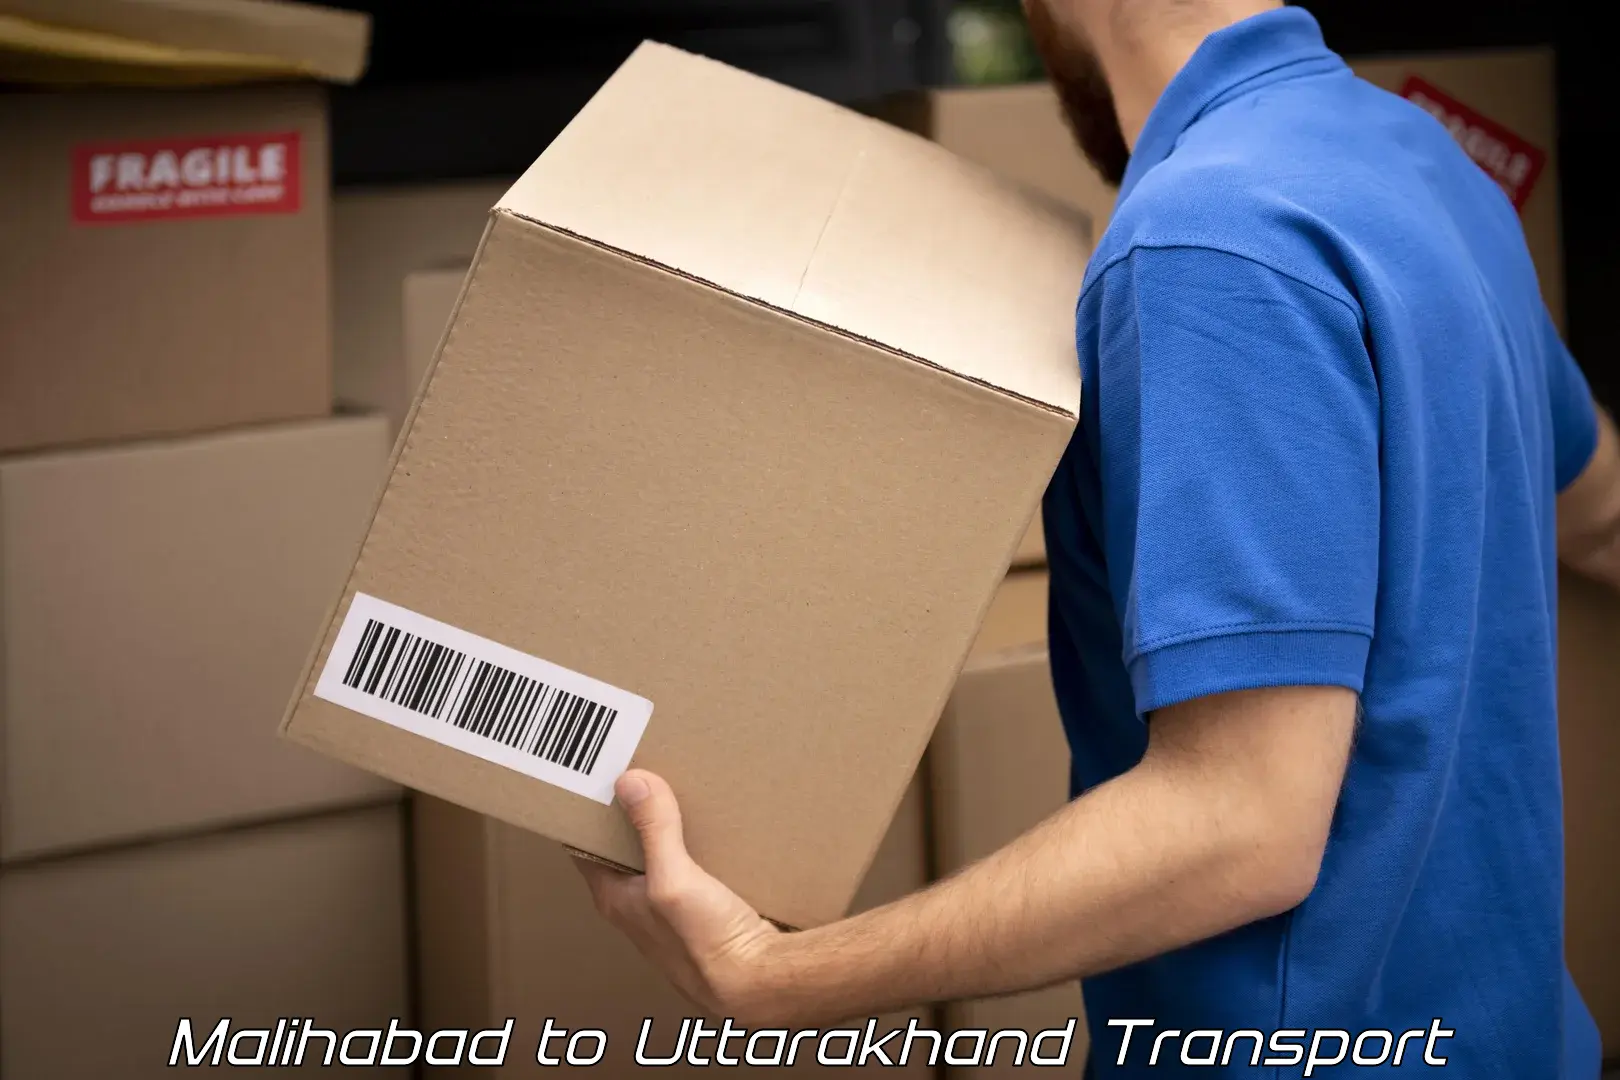 Parcel transport services in Malihabad to Rishikesh